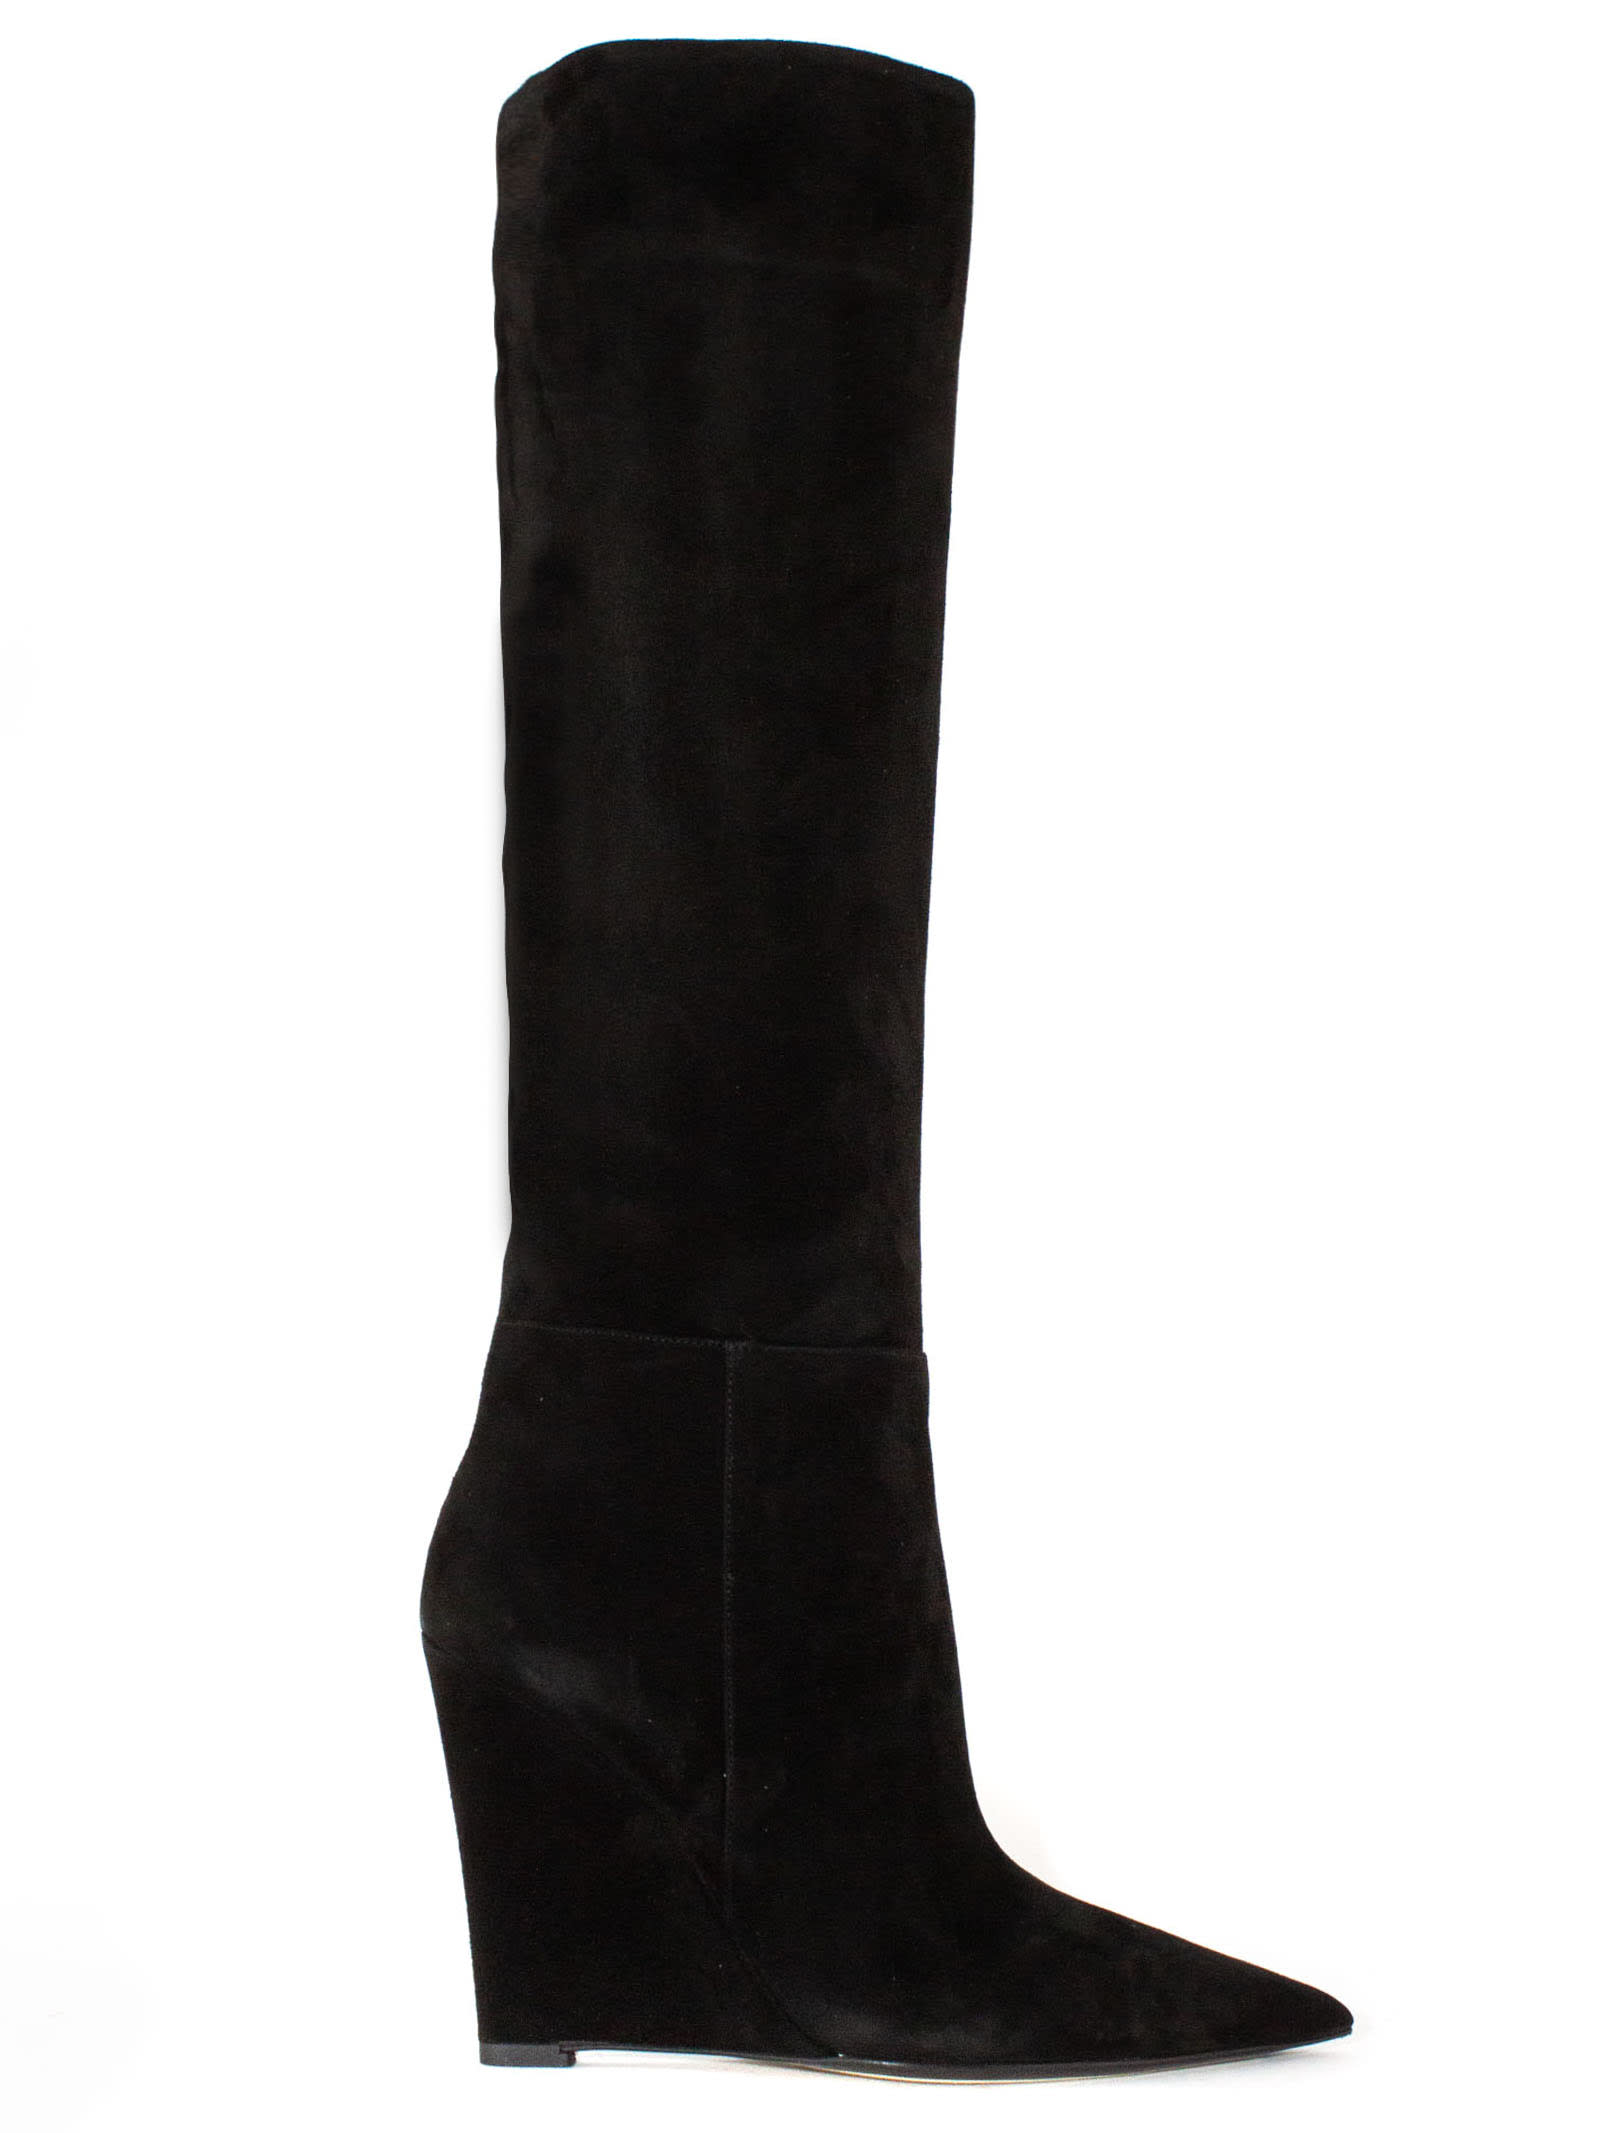 Black Suede Knee-high Boots